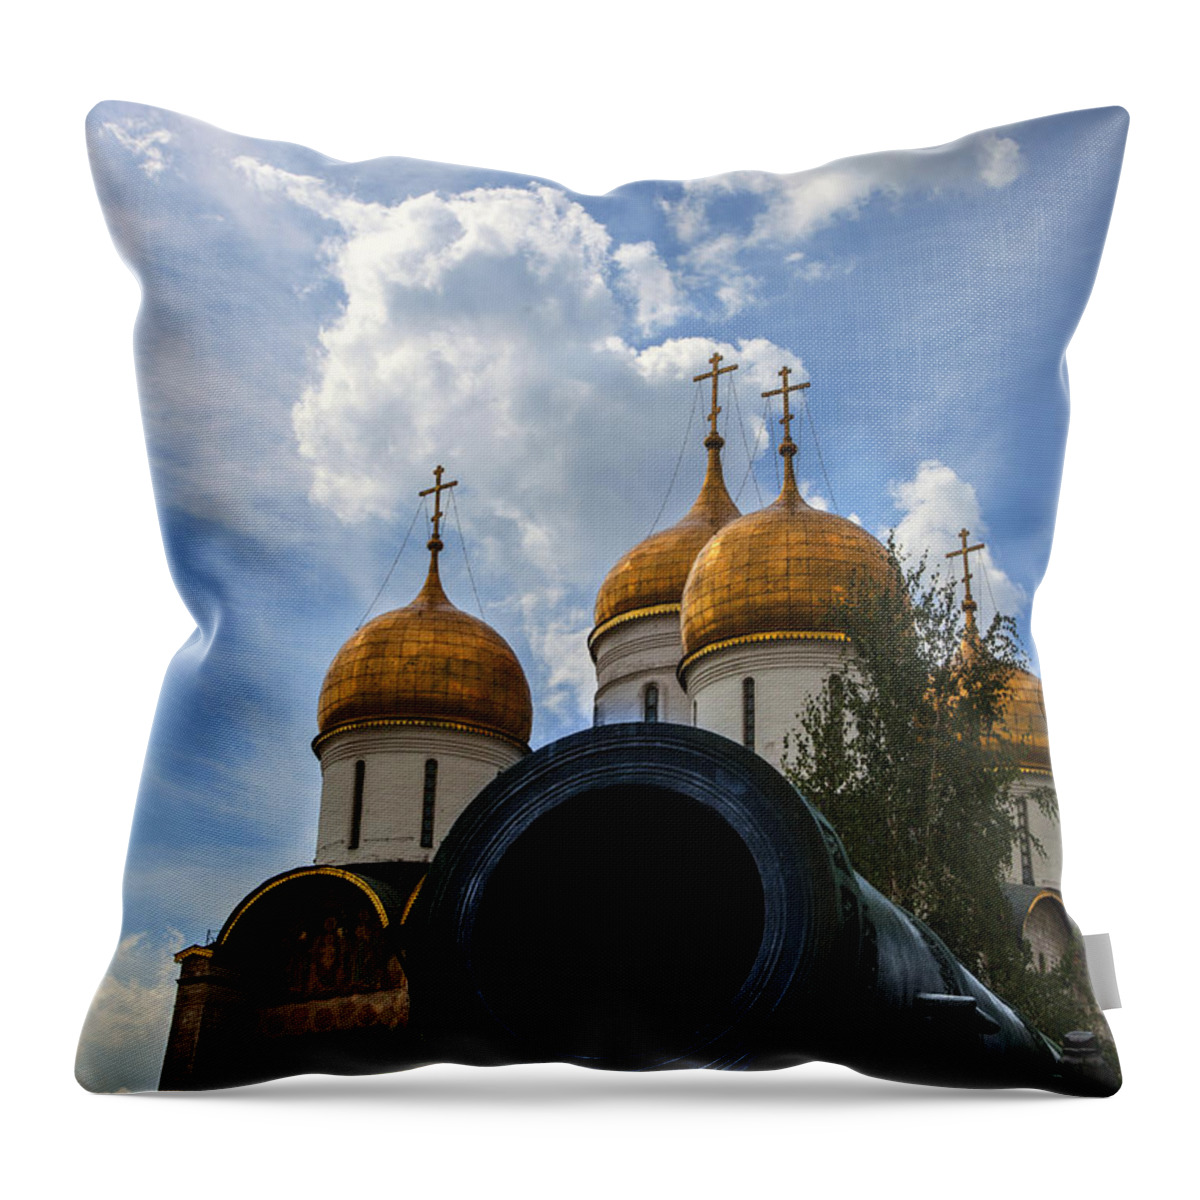 Cannon Throw Pillow featuring the photograph Cannon and Cathedral - Russia by Madeline Ellis